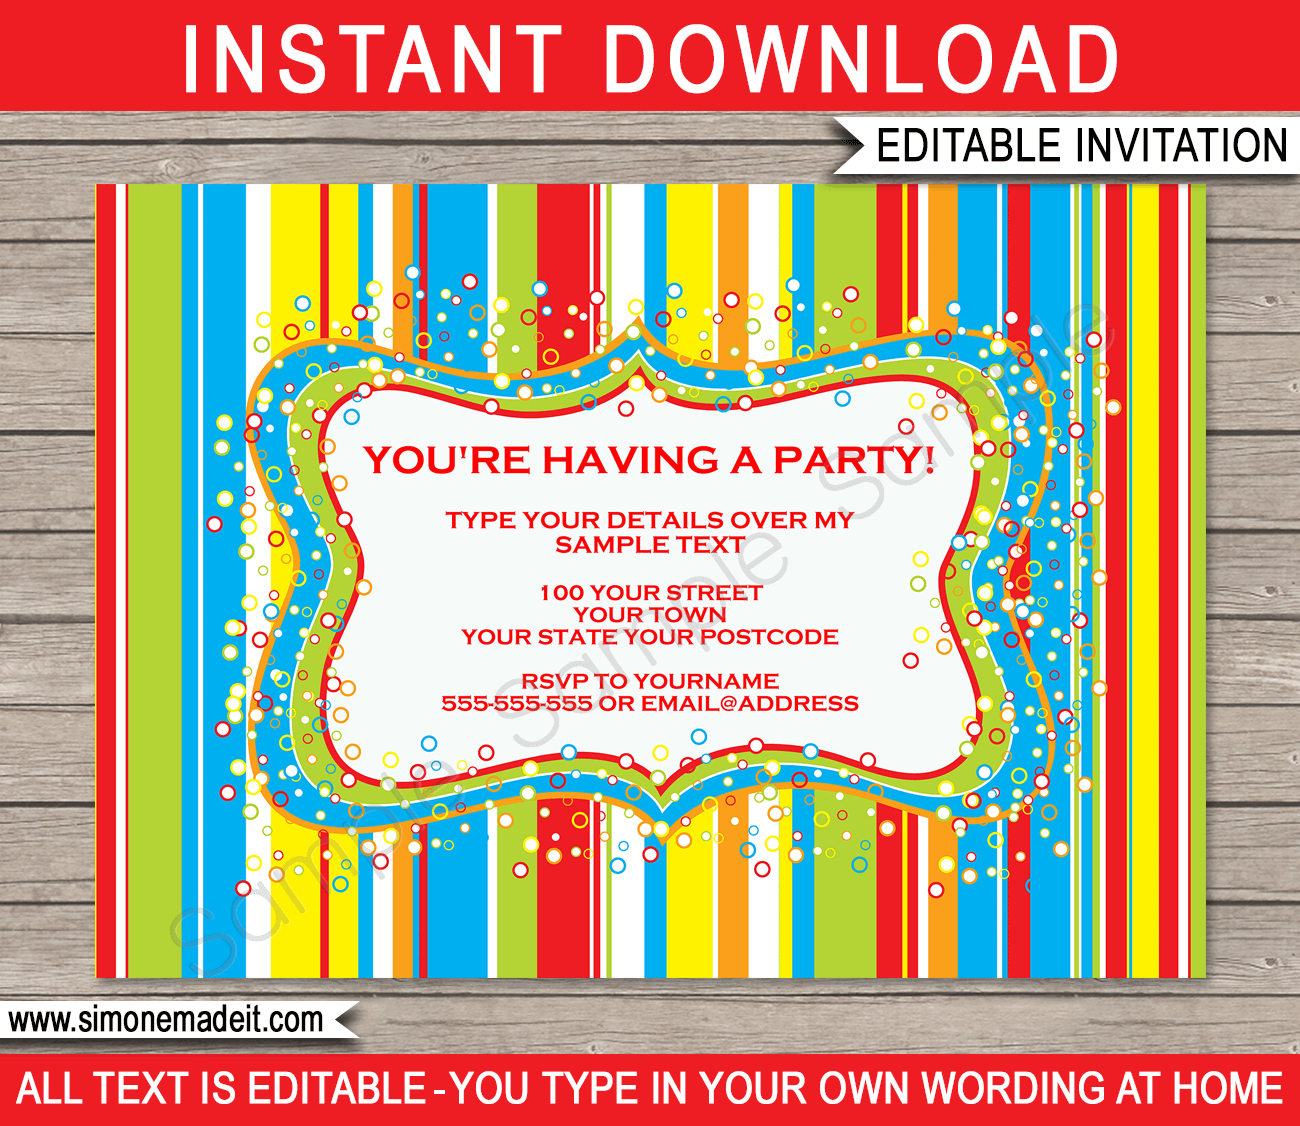 Sweet Shoppe Party Invitations | Candyland Party | Colorful | Birthday Party | Editable DIY Theme Template | INSTANT DOWNLOAD $7.50 via SIMONEmadeit.com